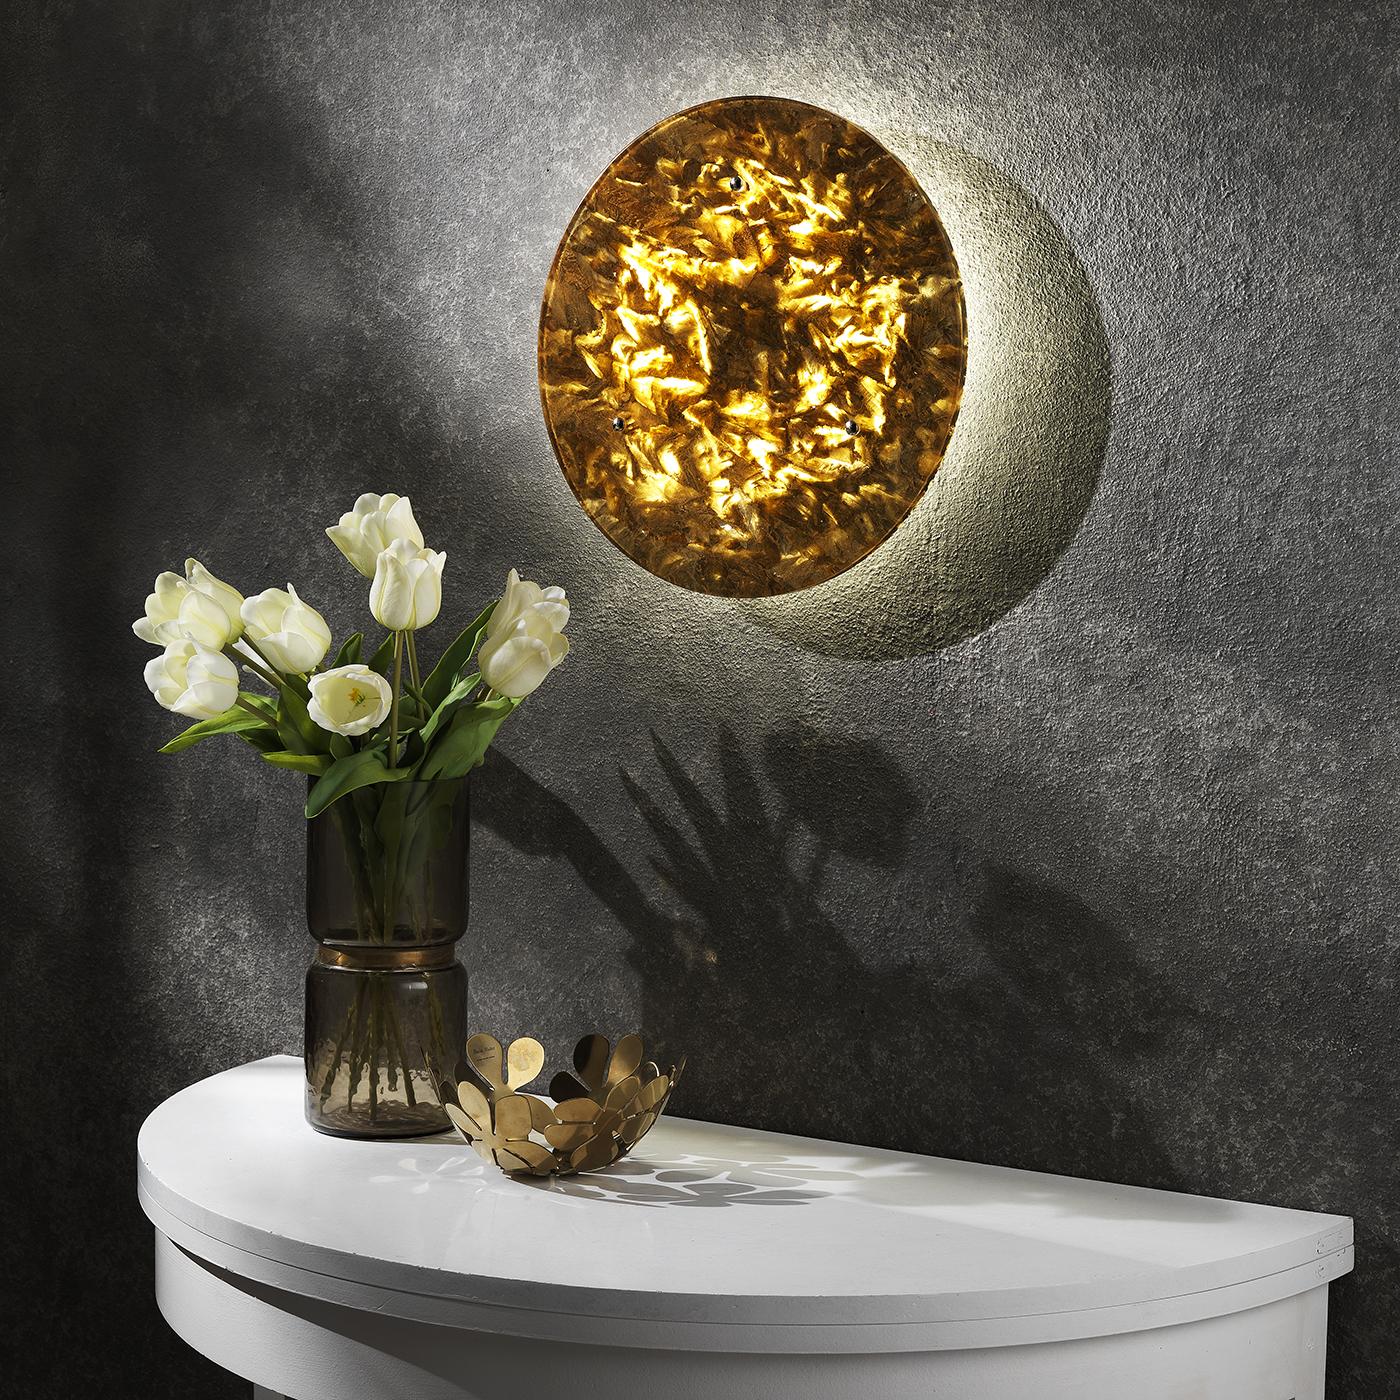 Meticulously handcrafted of Crystal Stone®, a crystalline alabaster unique to a quarry in Italy's Romagna region, this enchanting wall sconce captured the mysterious allure of the moon. The 55cm-diameter surface is sculpted in this translucent